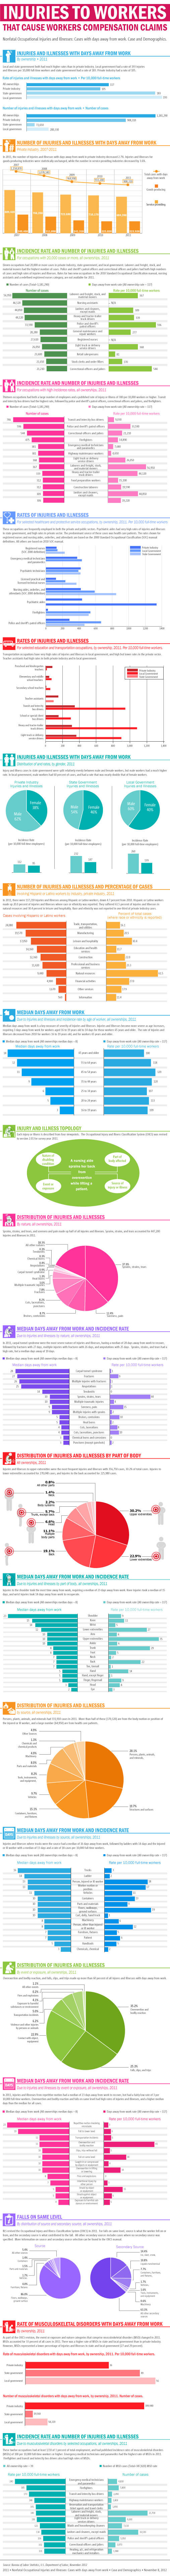 Injuries to workers that cause workers comp claims infographic